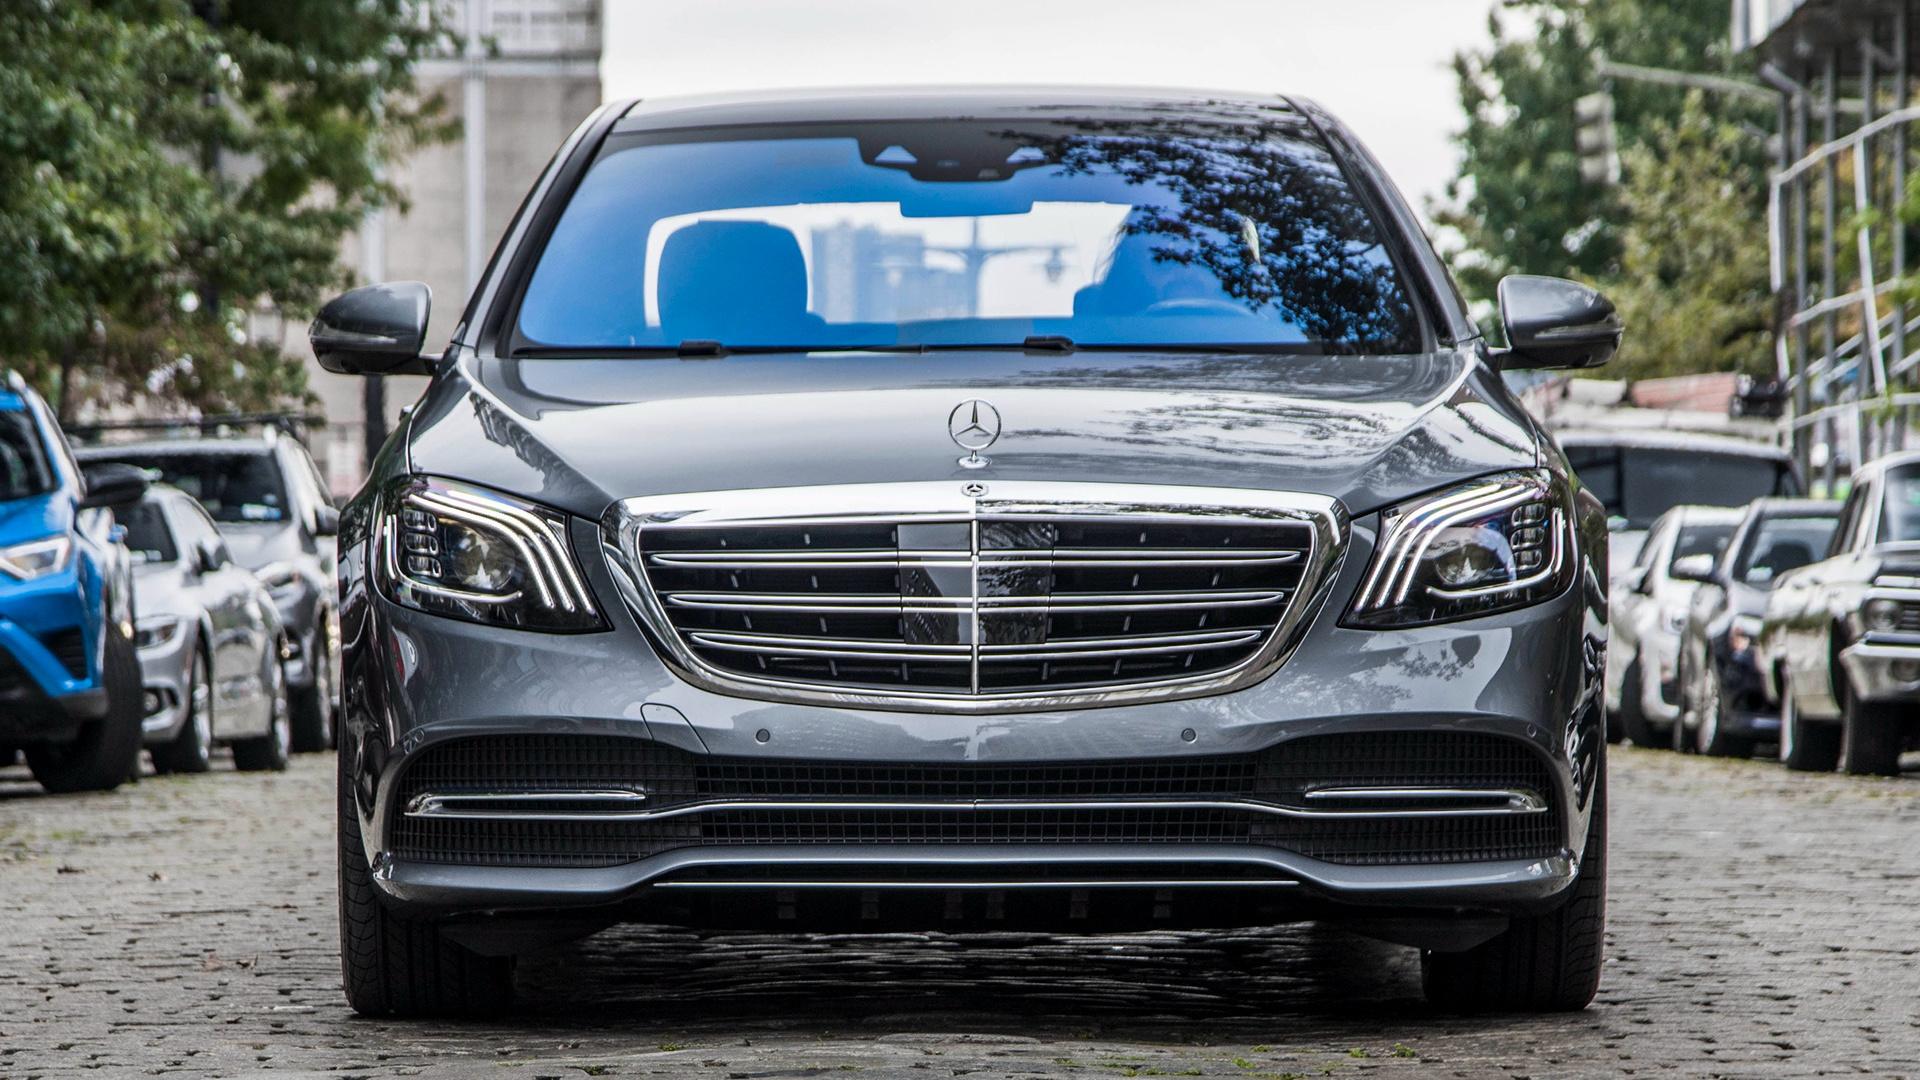 Mercedes Benz S Class [Long] (US) And HD Image